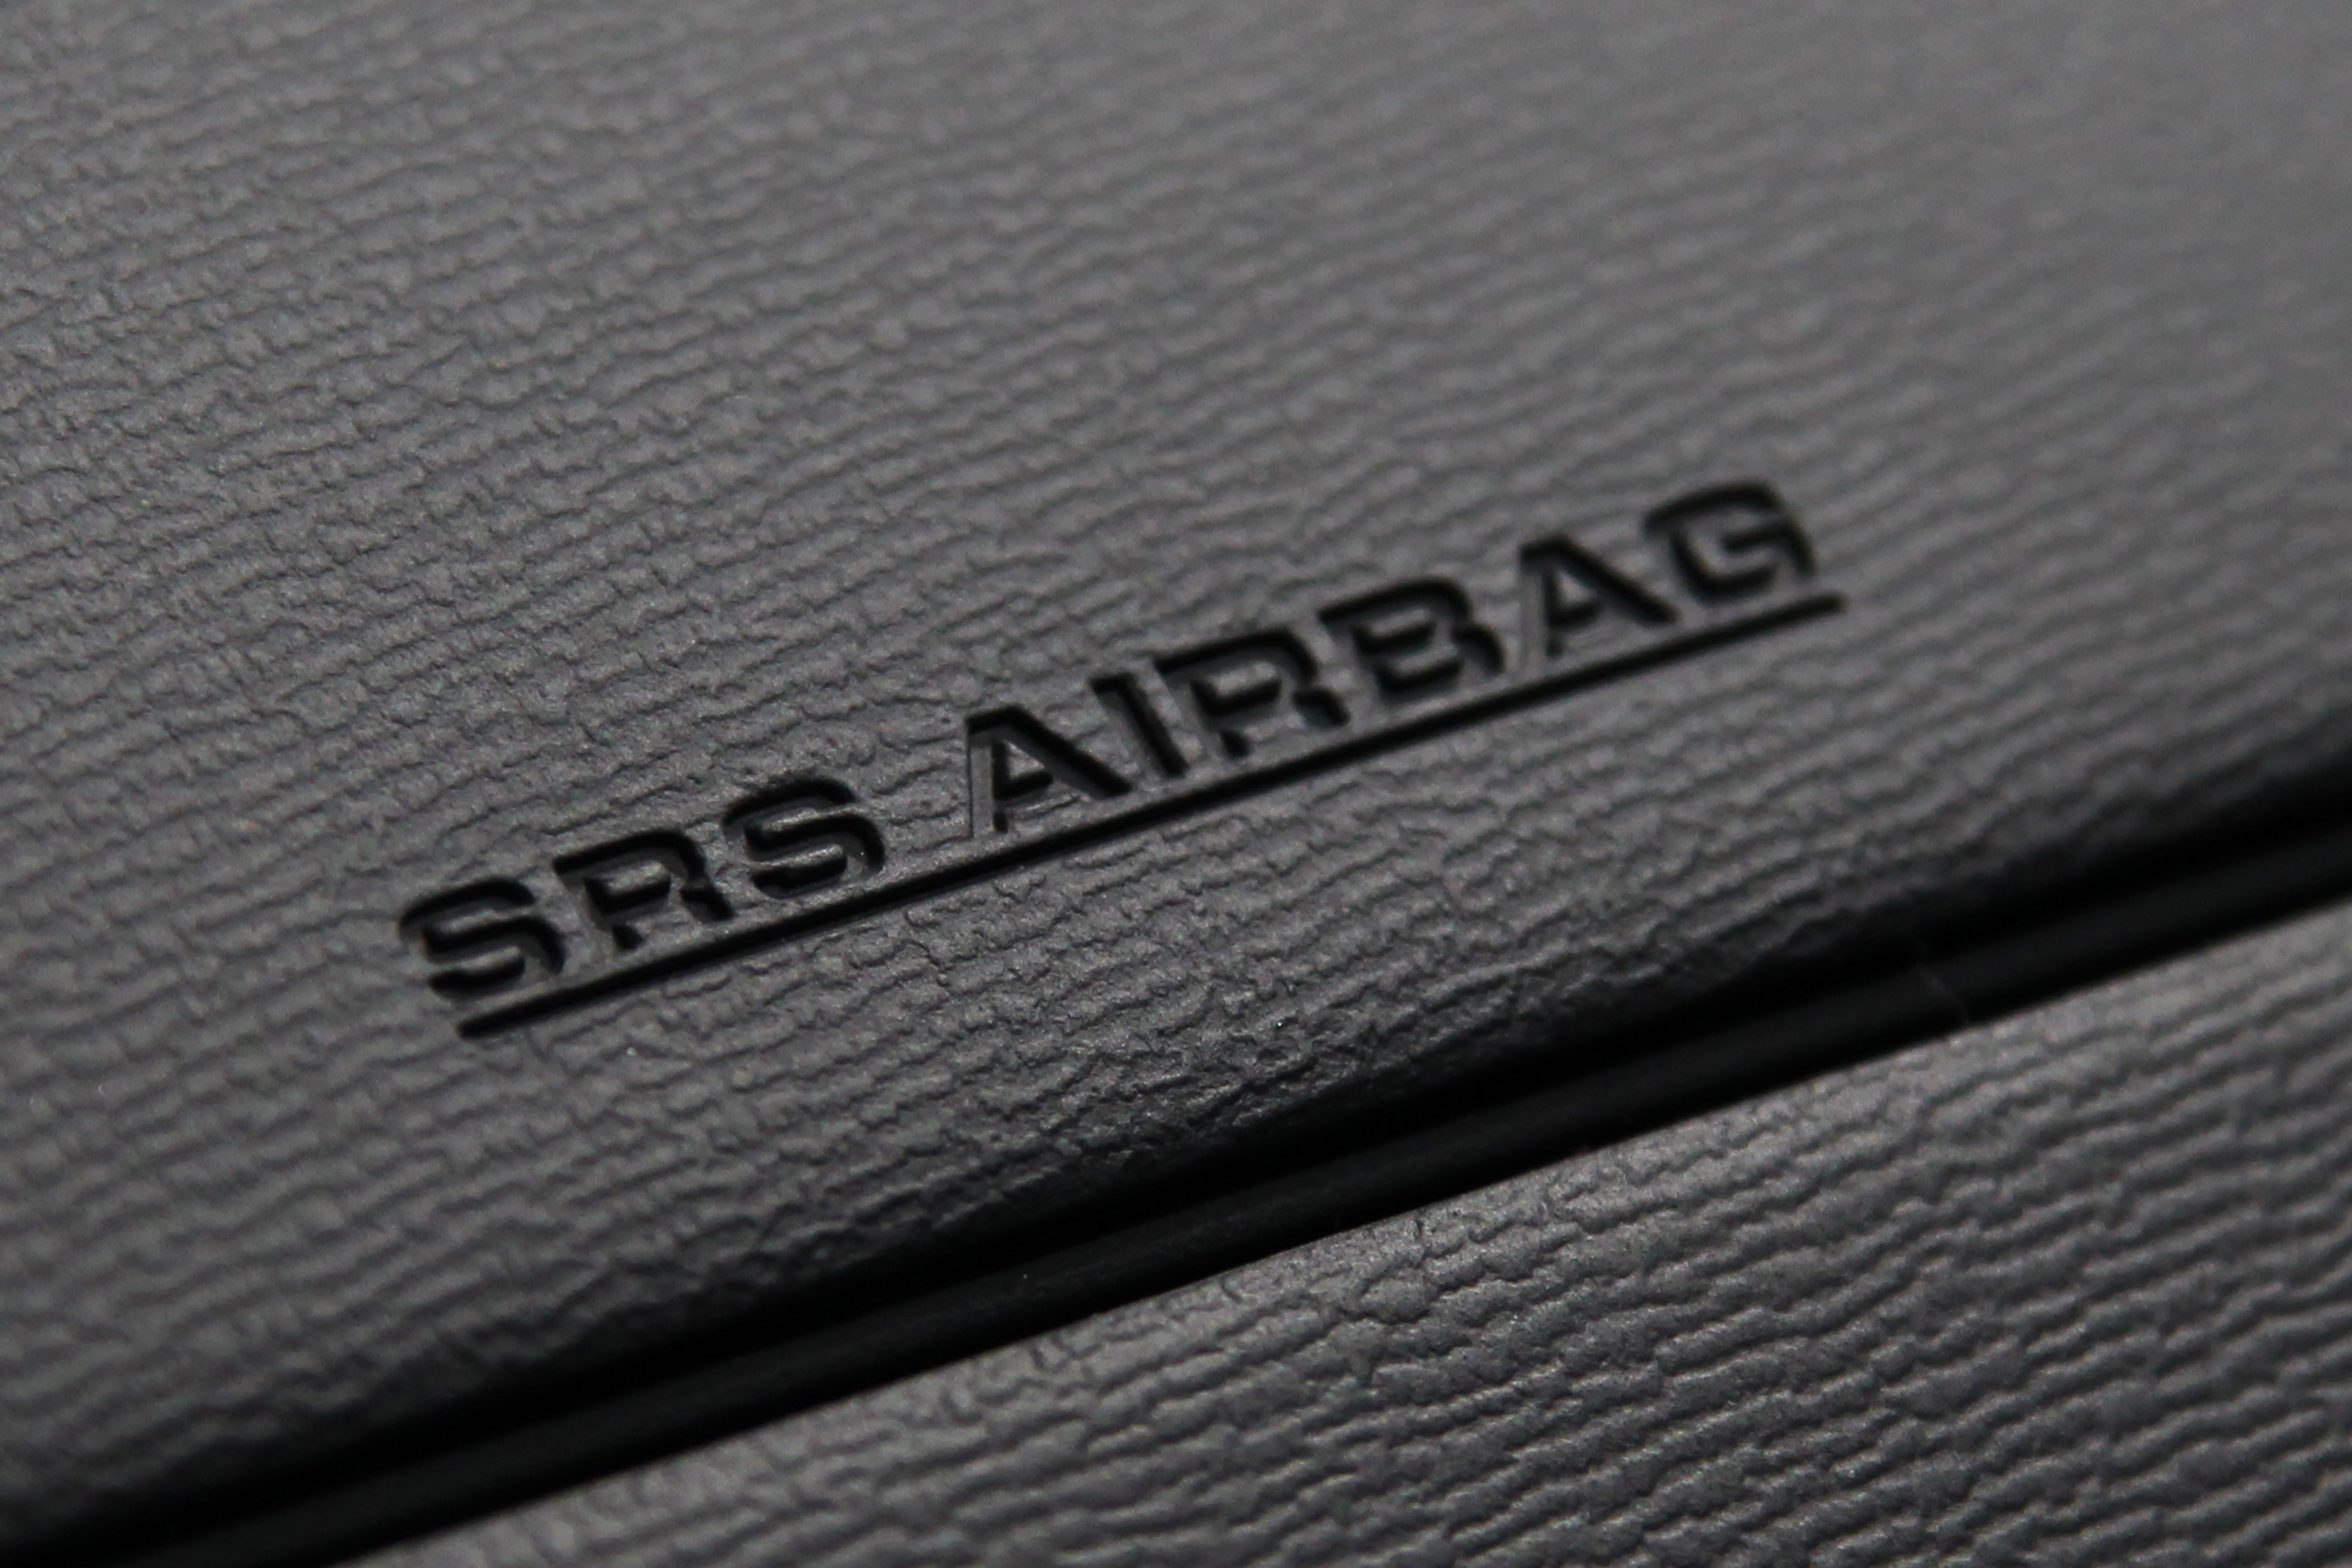 The airbag unit for the passenger seat of a Toyota Motor Corp. vehicle is seen at the company's showroom in Tokyo, Japan, on Thursday, April 11, 2013. (Bloomberg&mdash;Bloomberg via Getty Images)